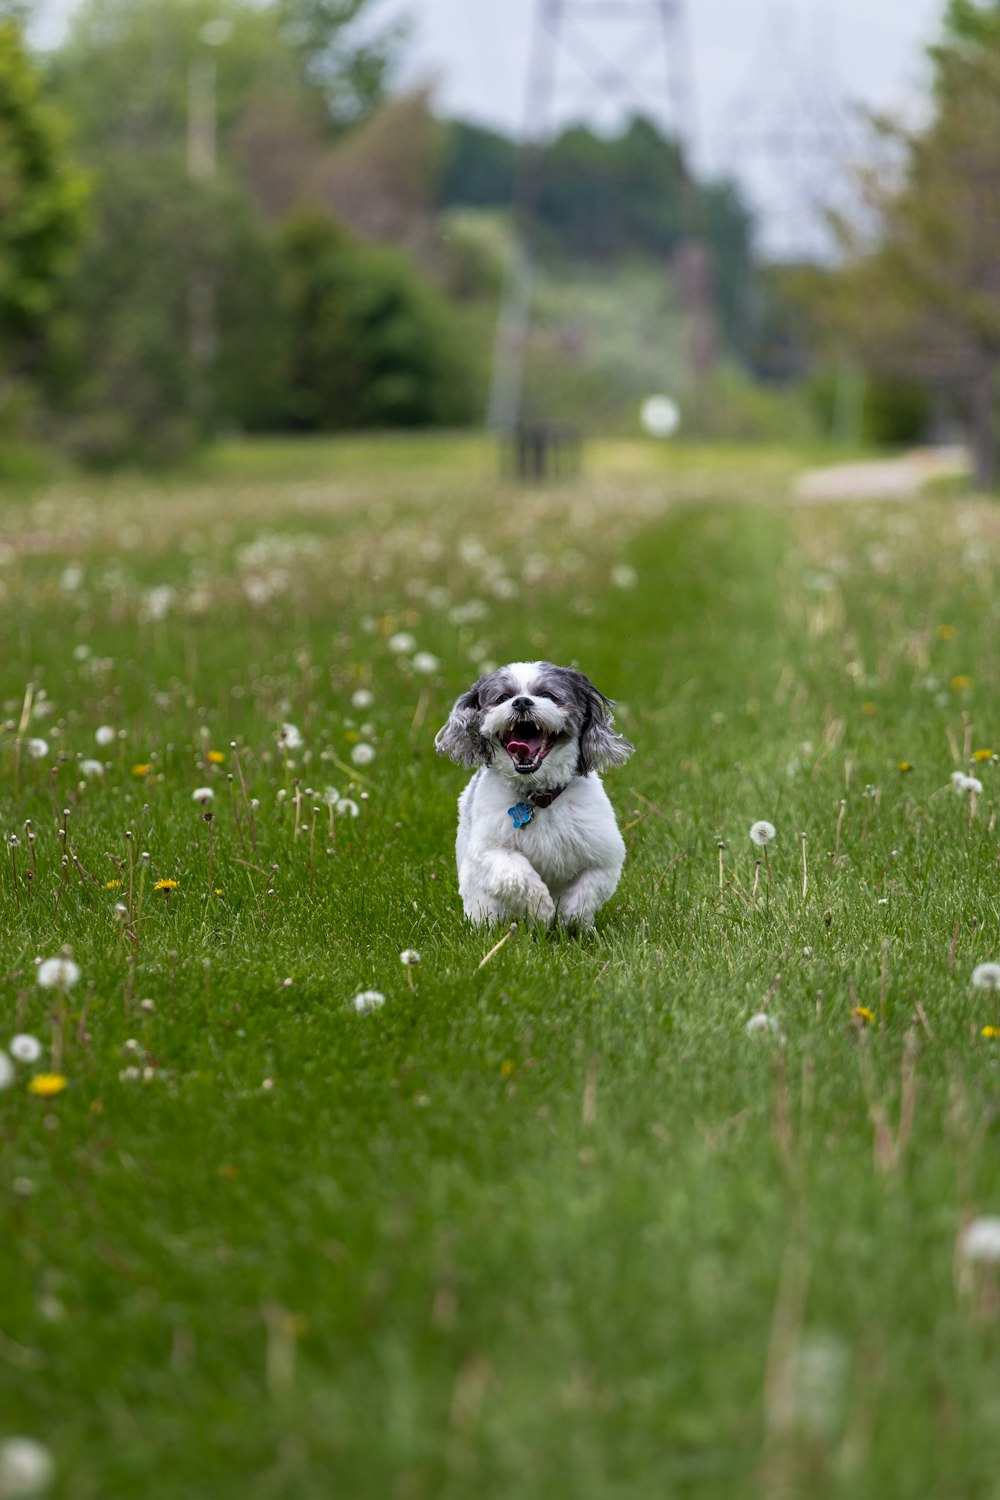 white and black shih tzu puppy on green grass field during daytime